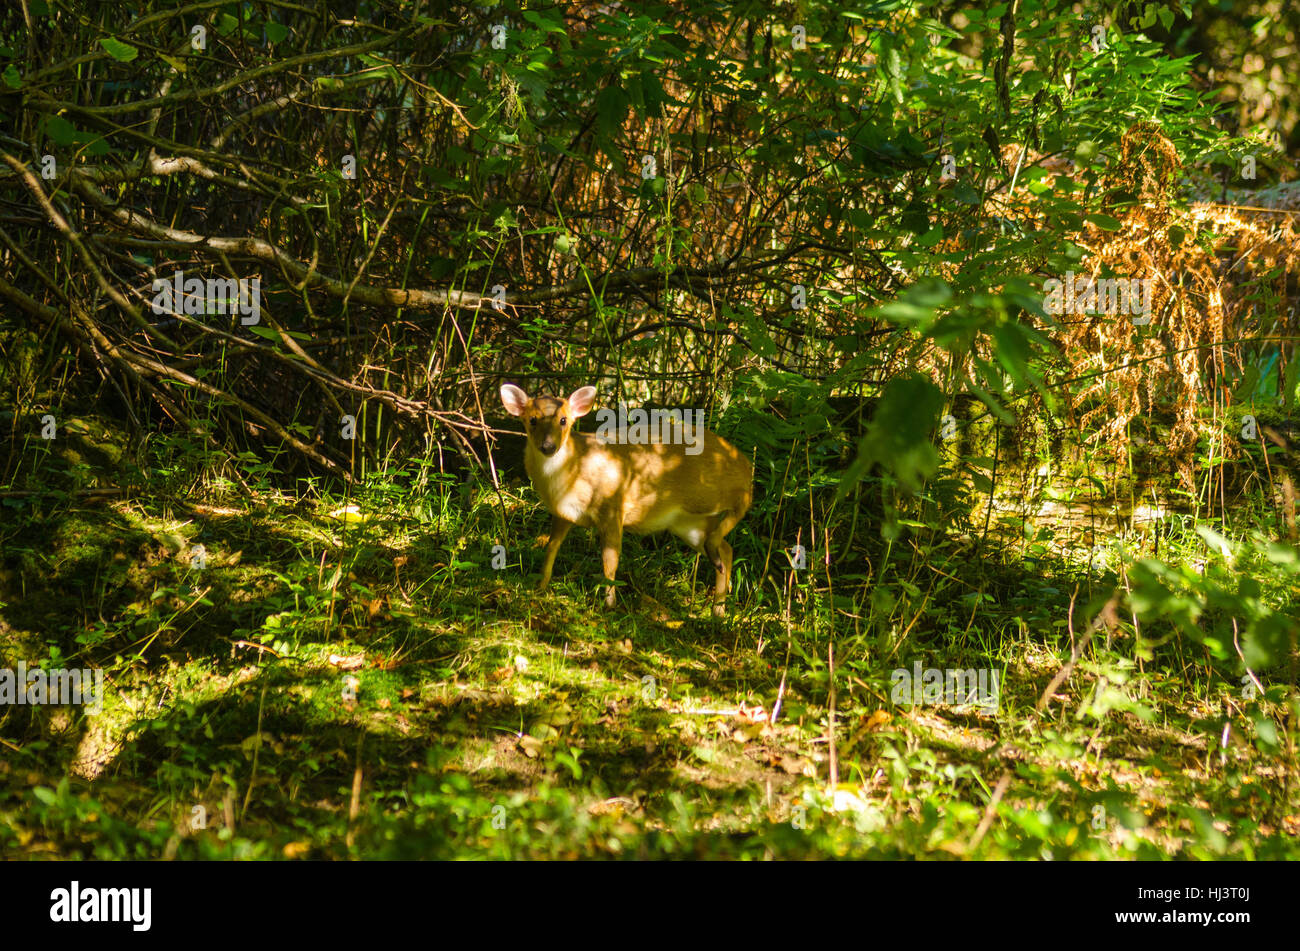 Muntjac Deer (Muntiacus reevesi) on a Nature reserve in the Herefordshire UK cuntryside Stock Photo